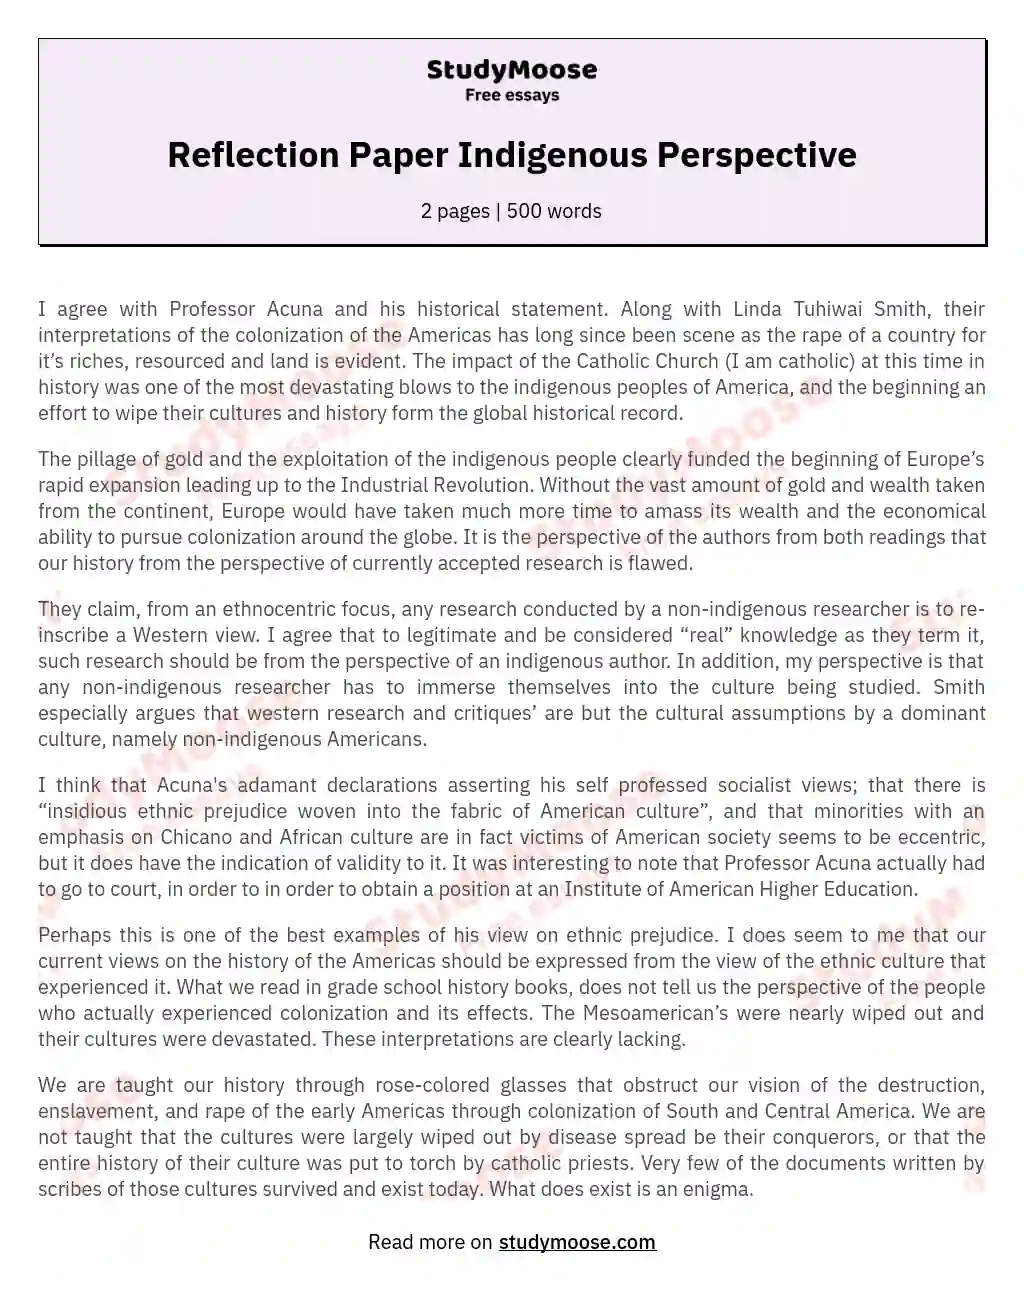 Reflection Paper Indigenous Perspective essay